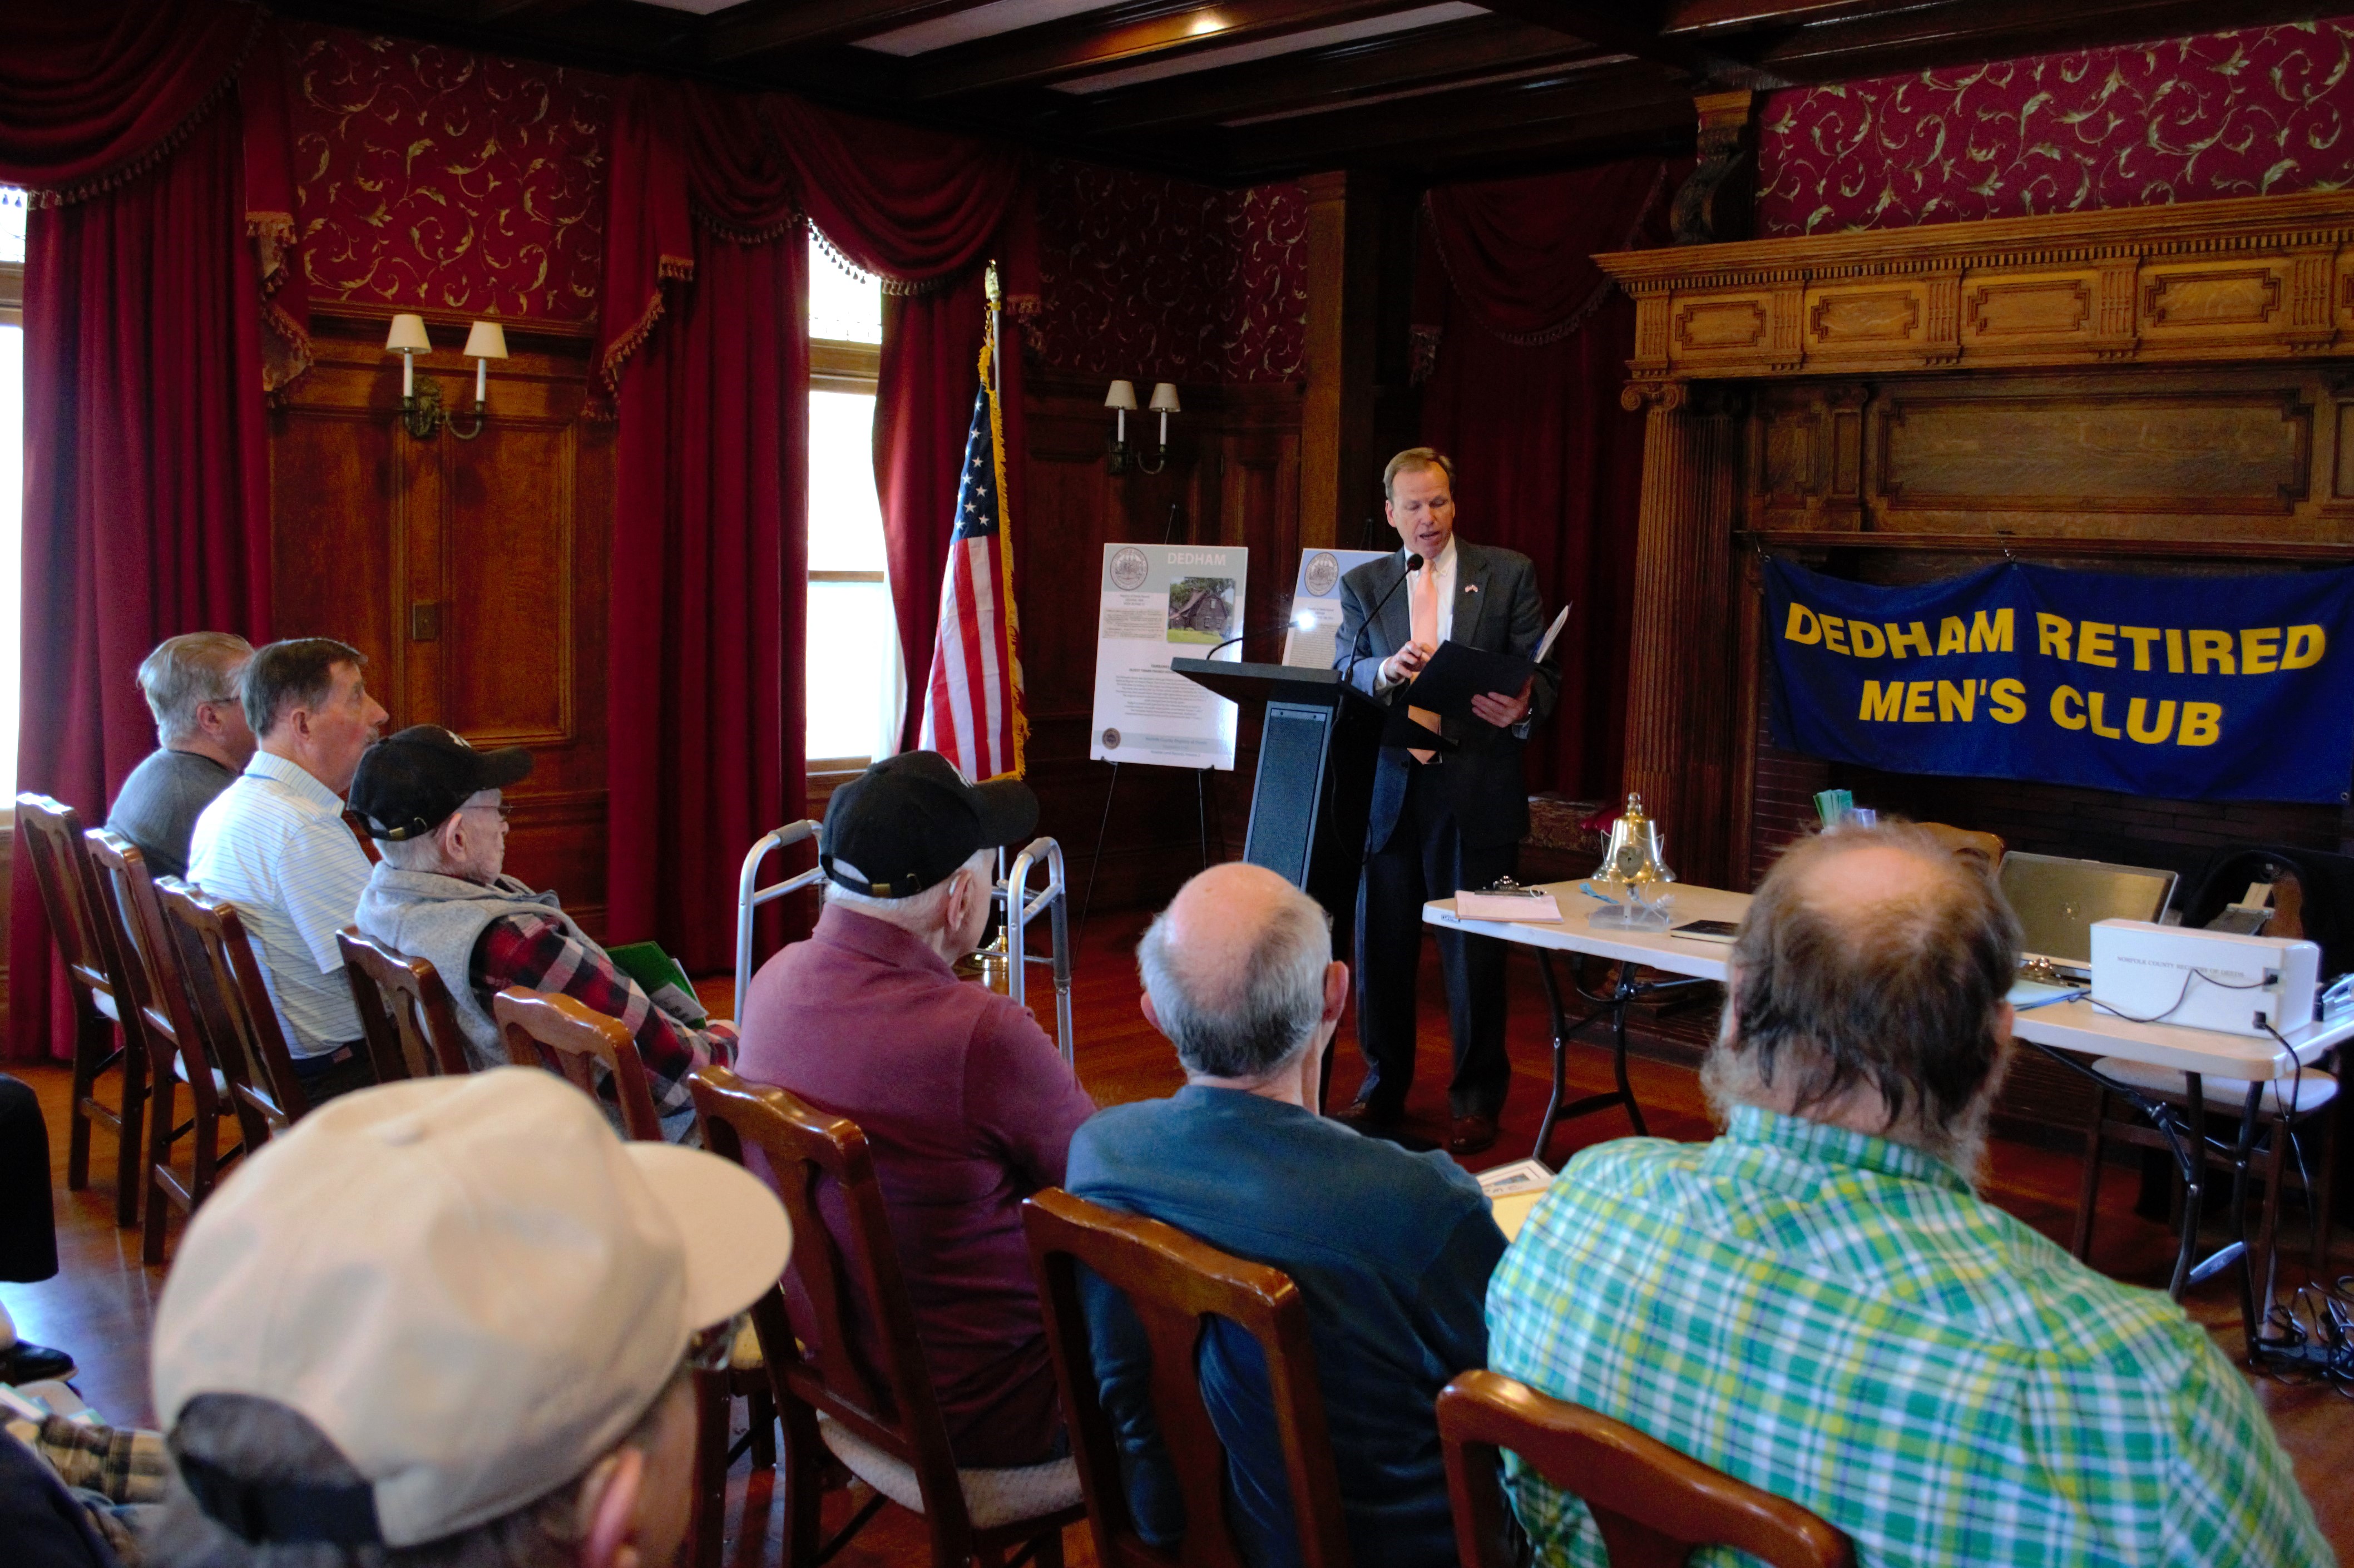 Norfolk County Register of Deeds William P. O'Donnell discusses Registry of Deeds’ Notable Land records Booklets during a speaking event  at the Endicott Estate for the Dedham Retired Men’s Club, as part of his ongoing efforts to bring the Registry of Deeds directly to the residents of Norfolk County.